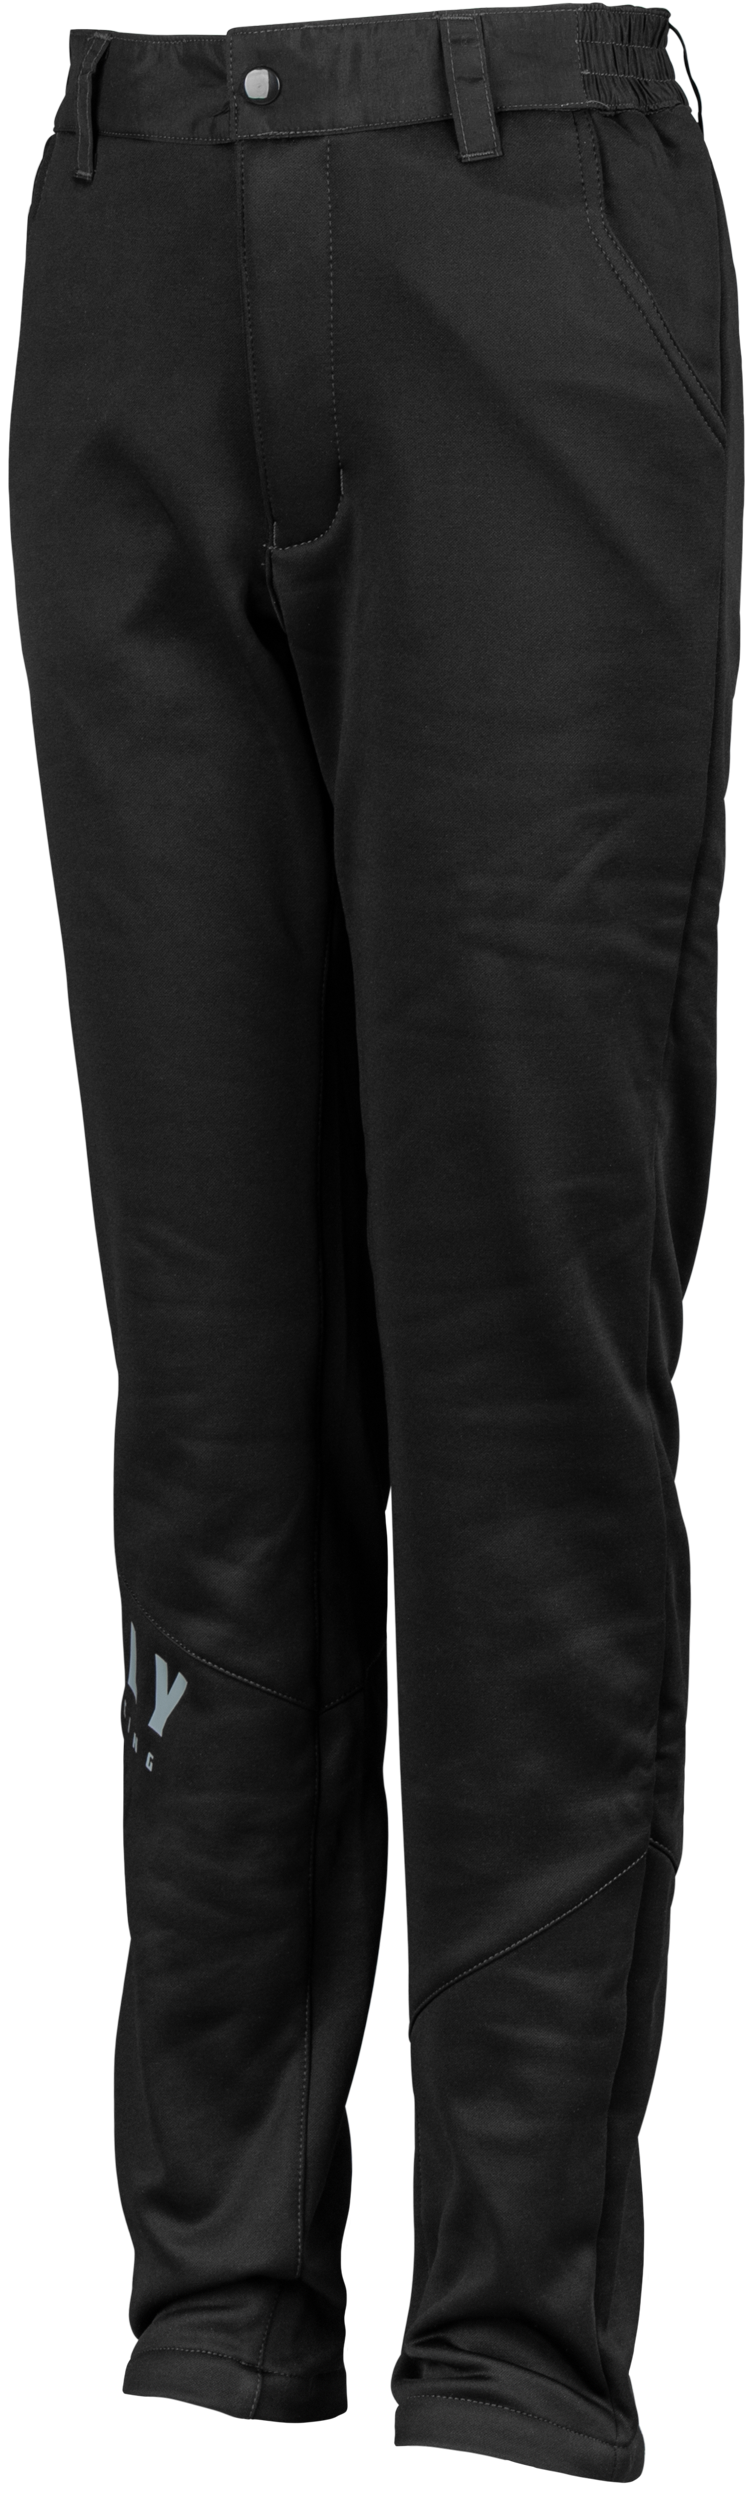 FLY RACING Women's Mid-Layer Pants Black Sm 354-6347S